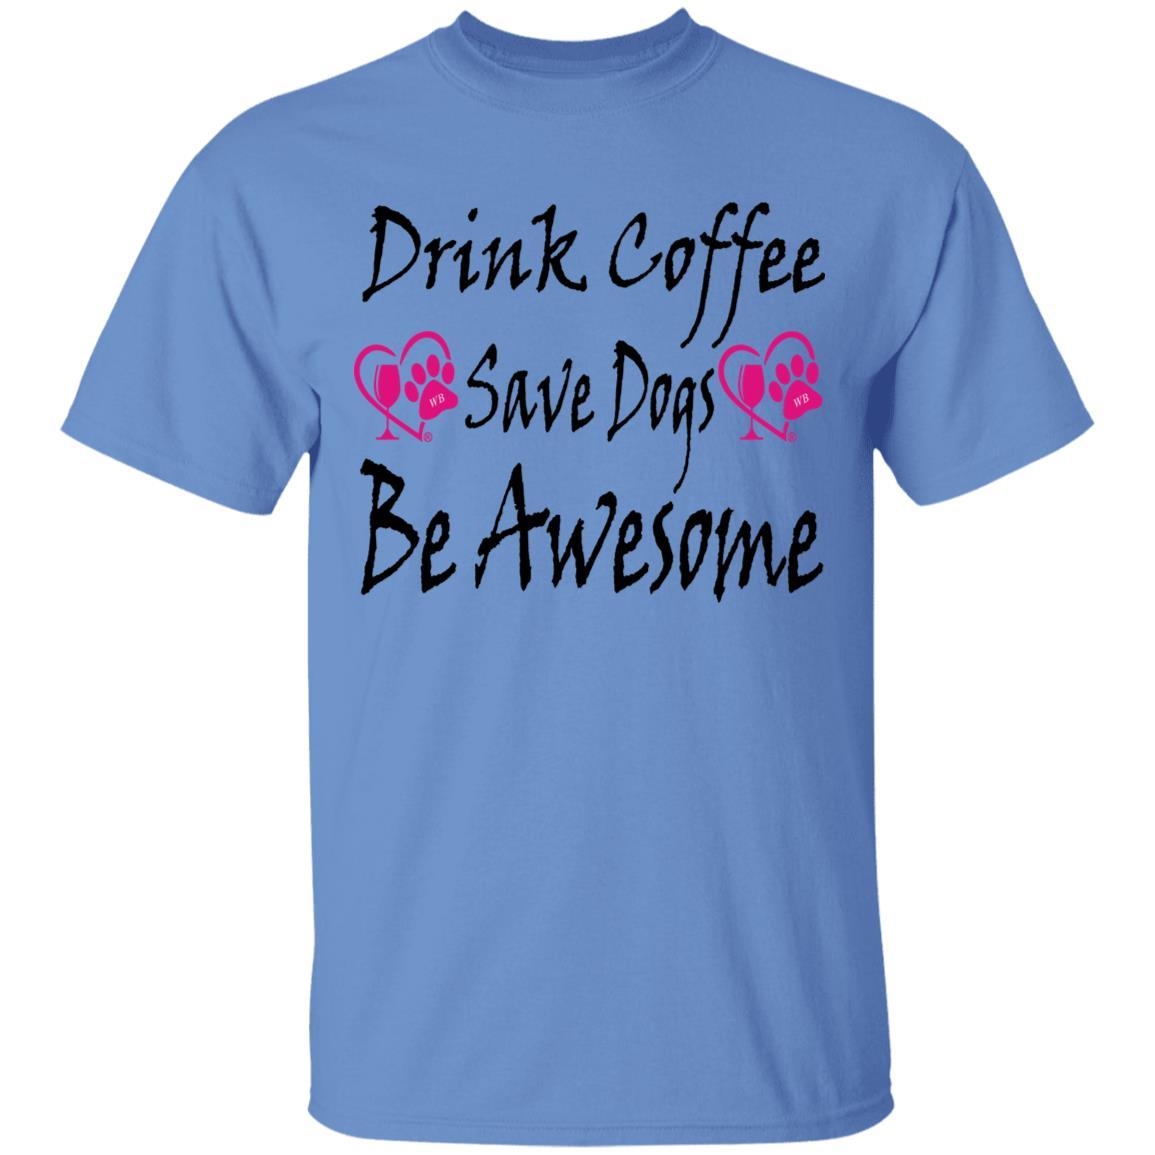 T-Shirts Carolina Blue / S Winey Bitches Co "Drink Coffee Save Dogs Be Awesome" 5.3 oz. T-Shirt WineyBitchesCo